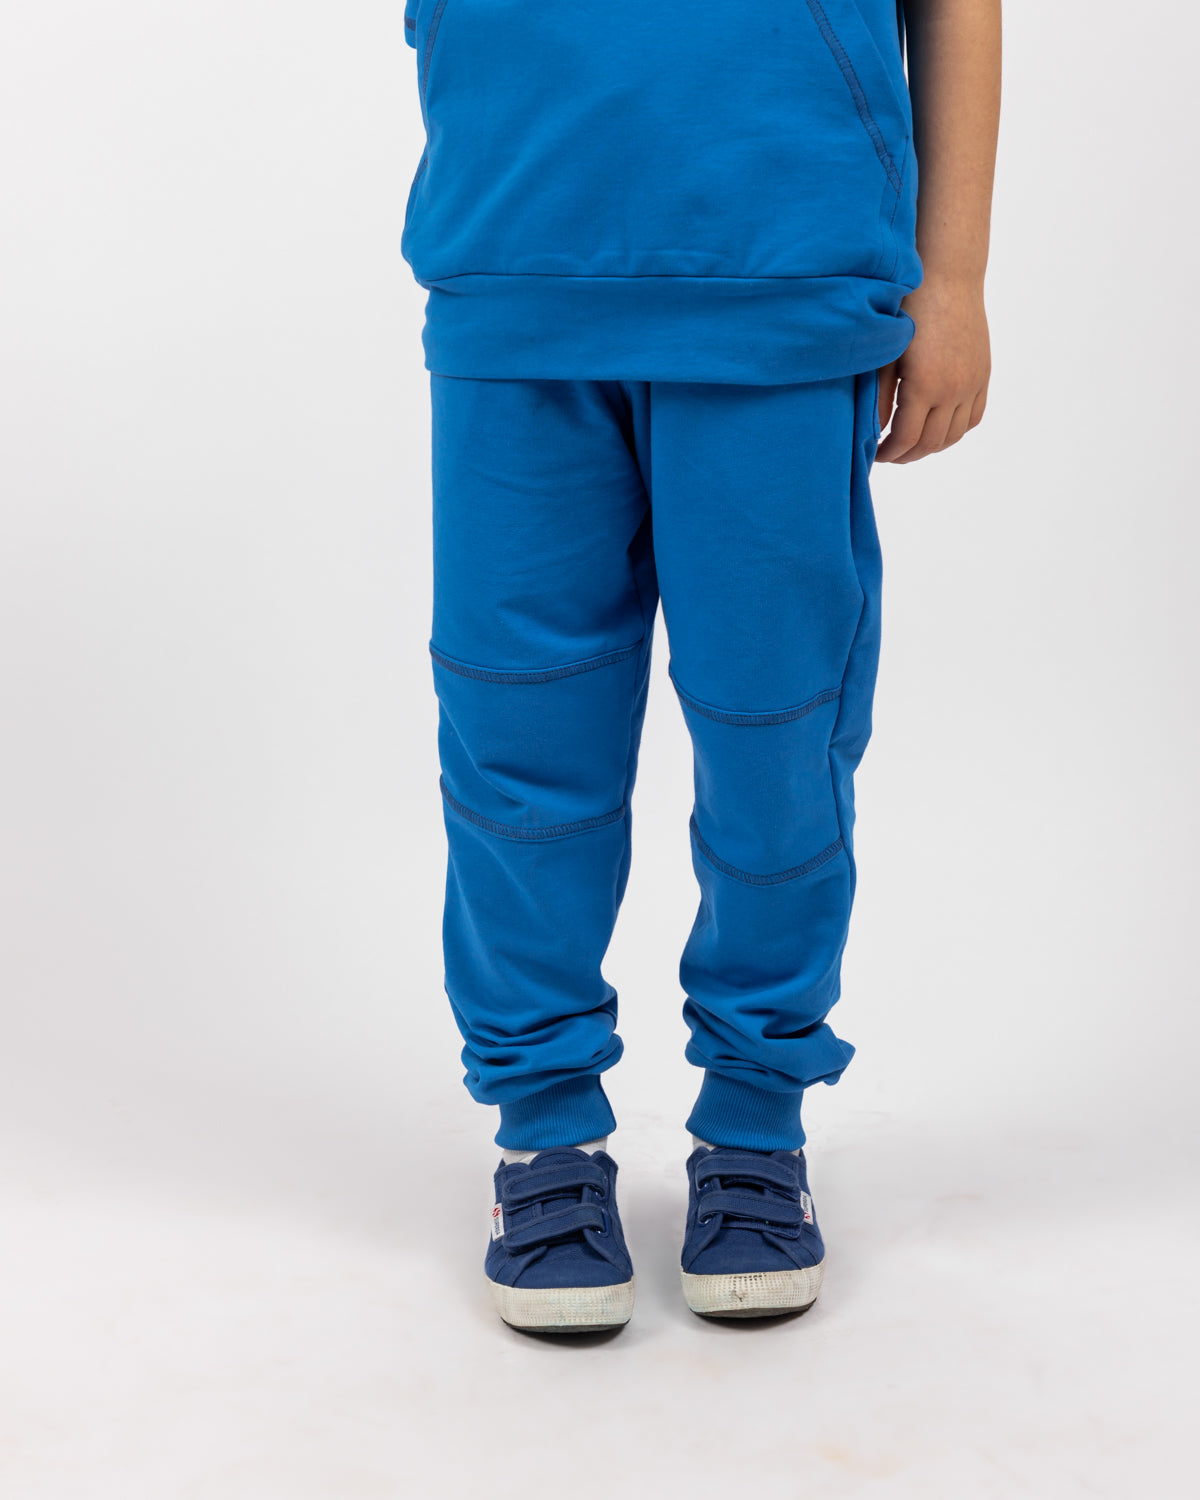 Hooded Sweatshirt with Pockets For Boys - Blue